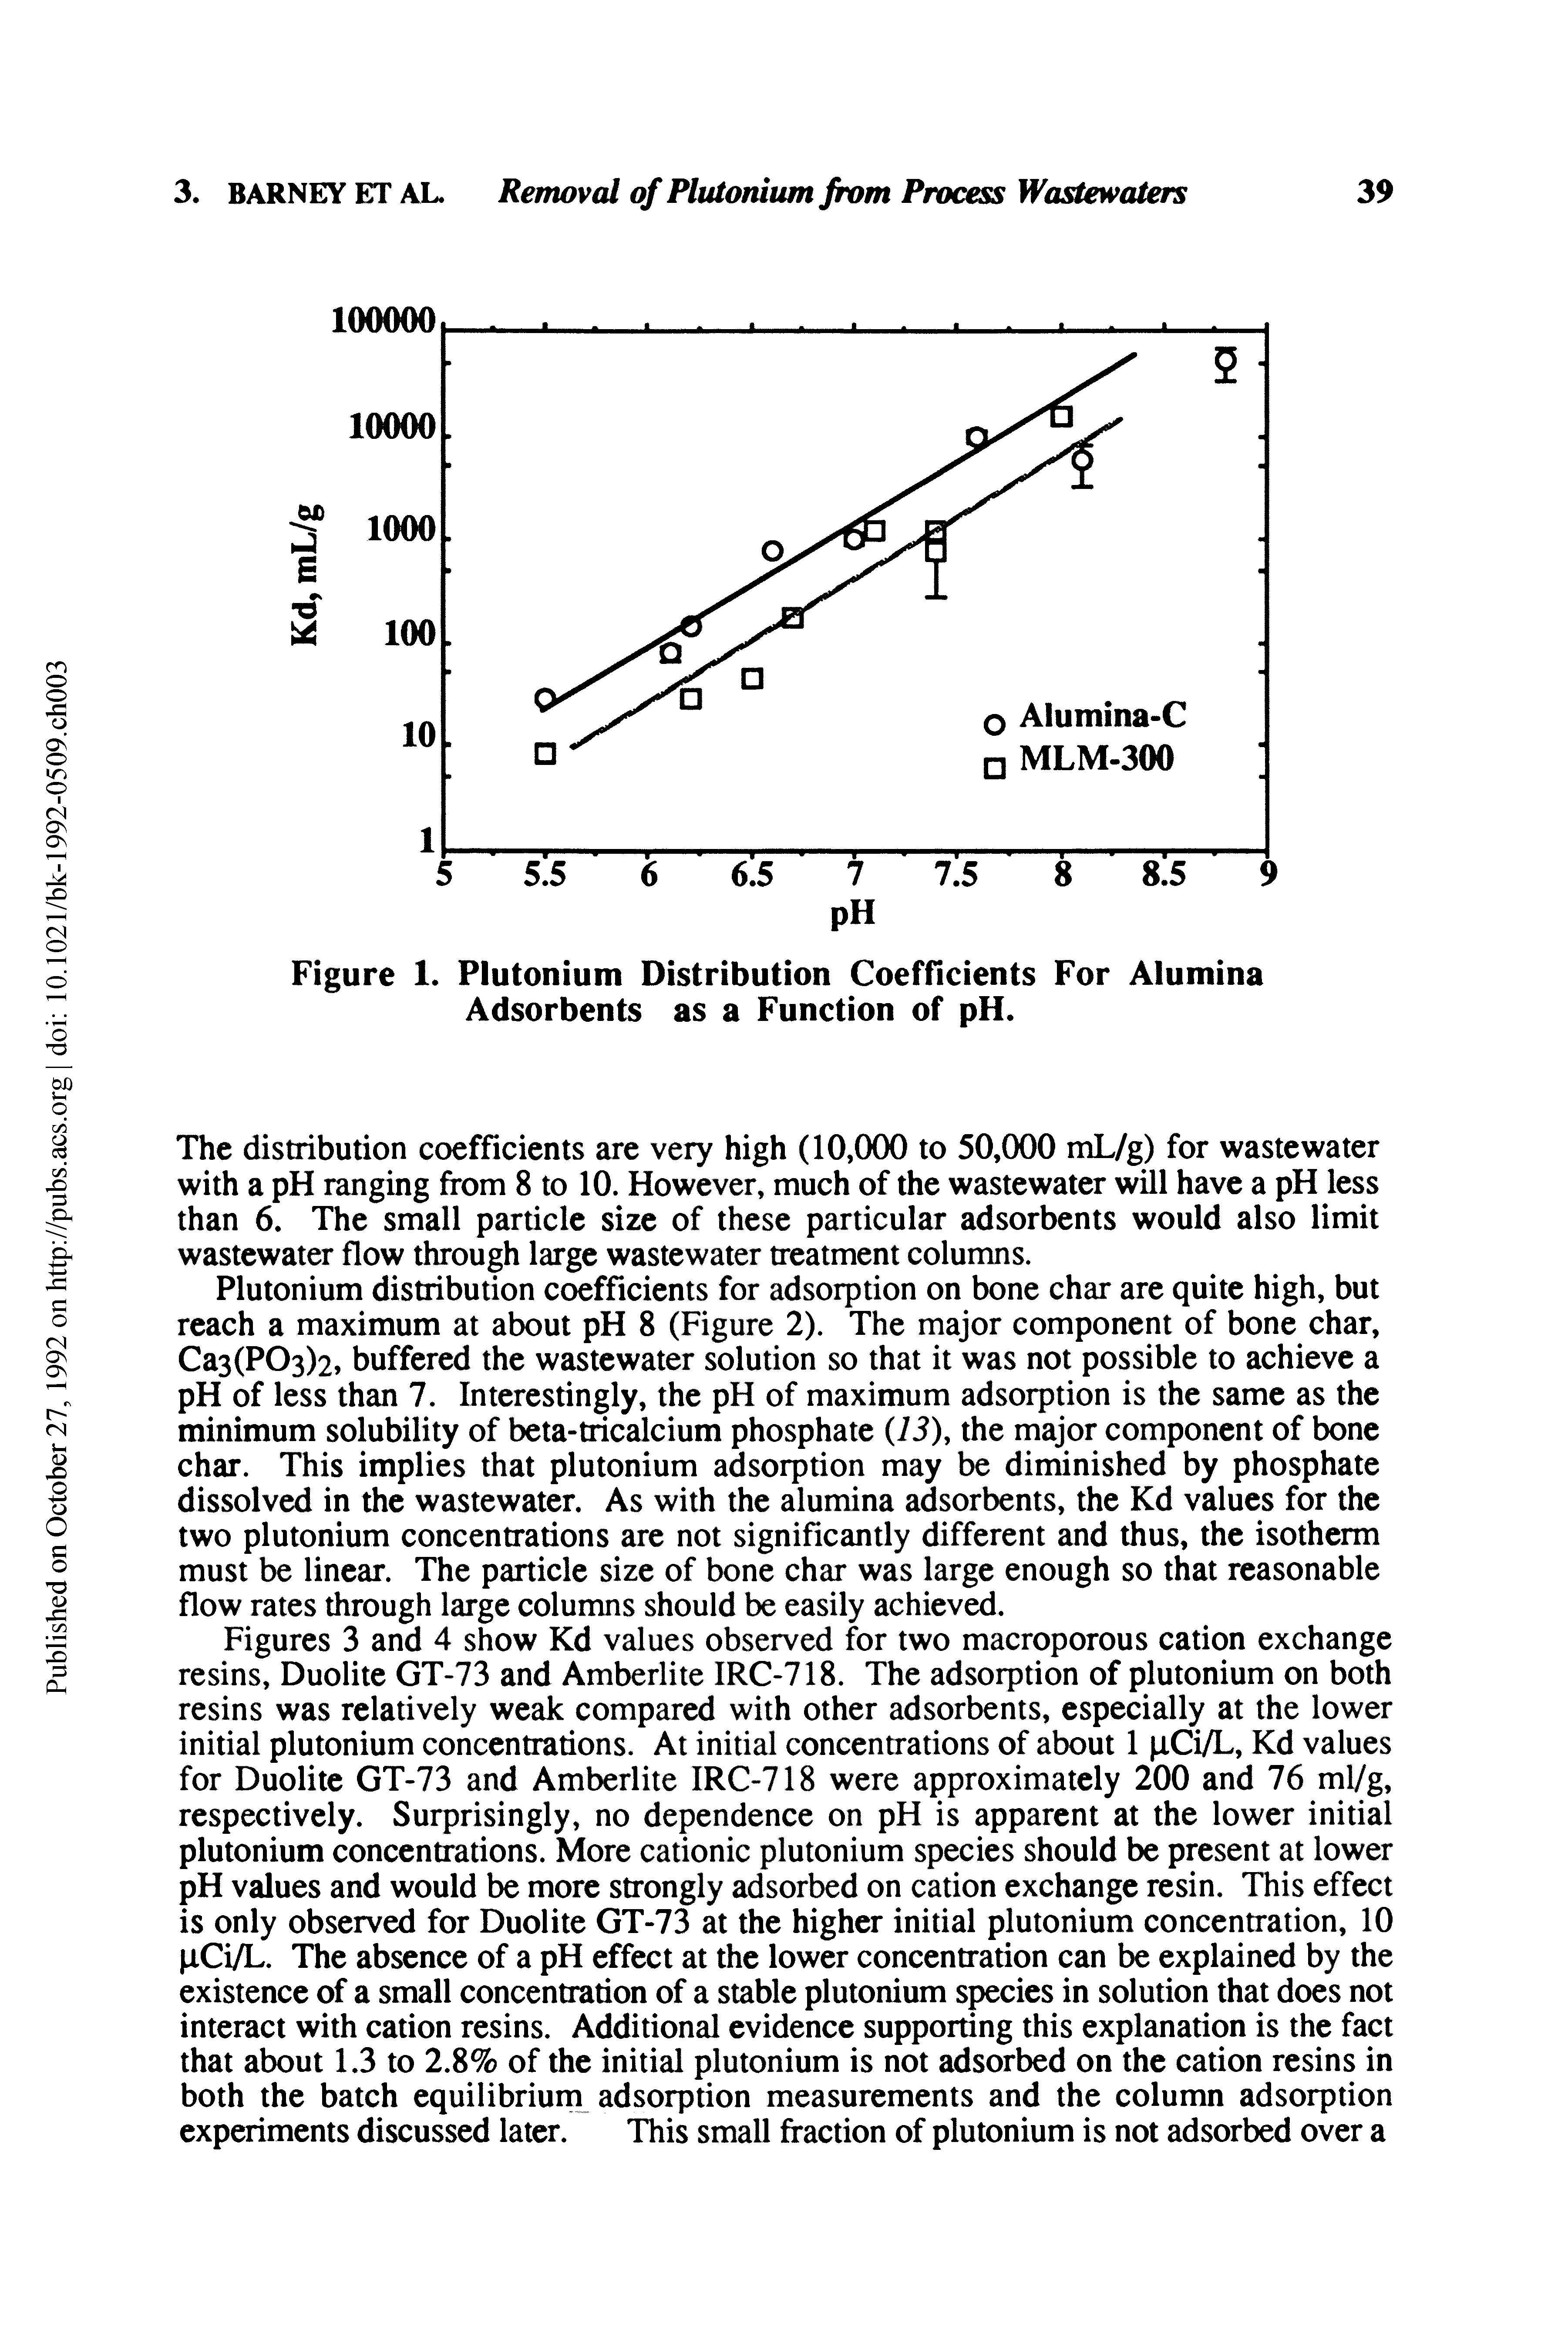 Figure 1. Plutonium Distribution Coefficients For Alumina Adsorbents as a Function of pH.